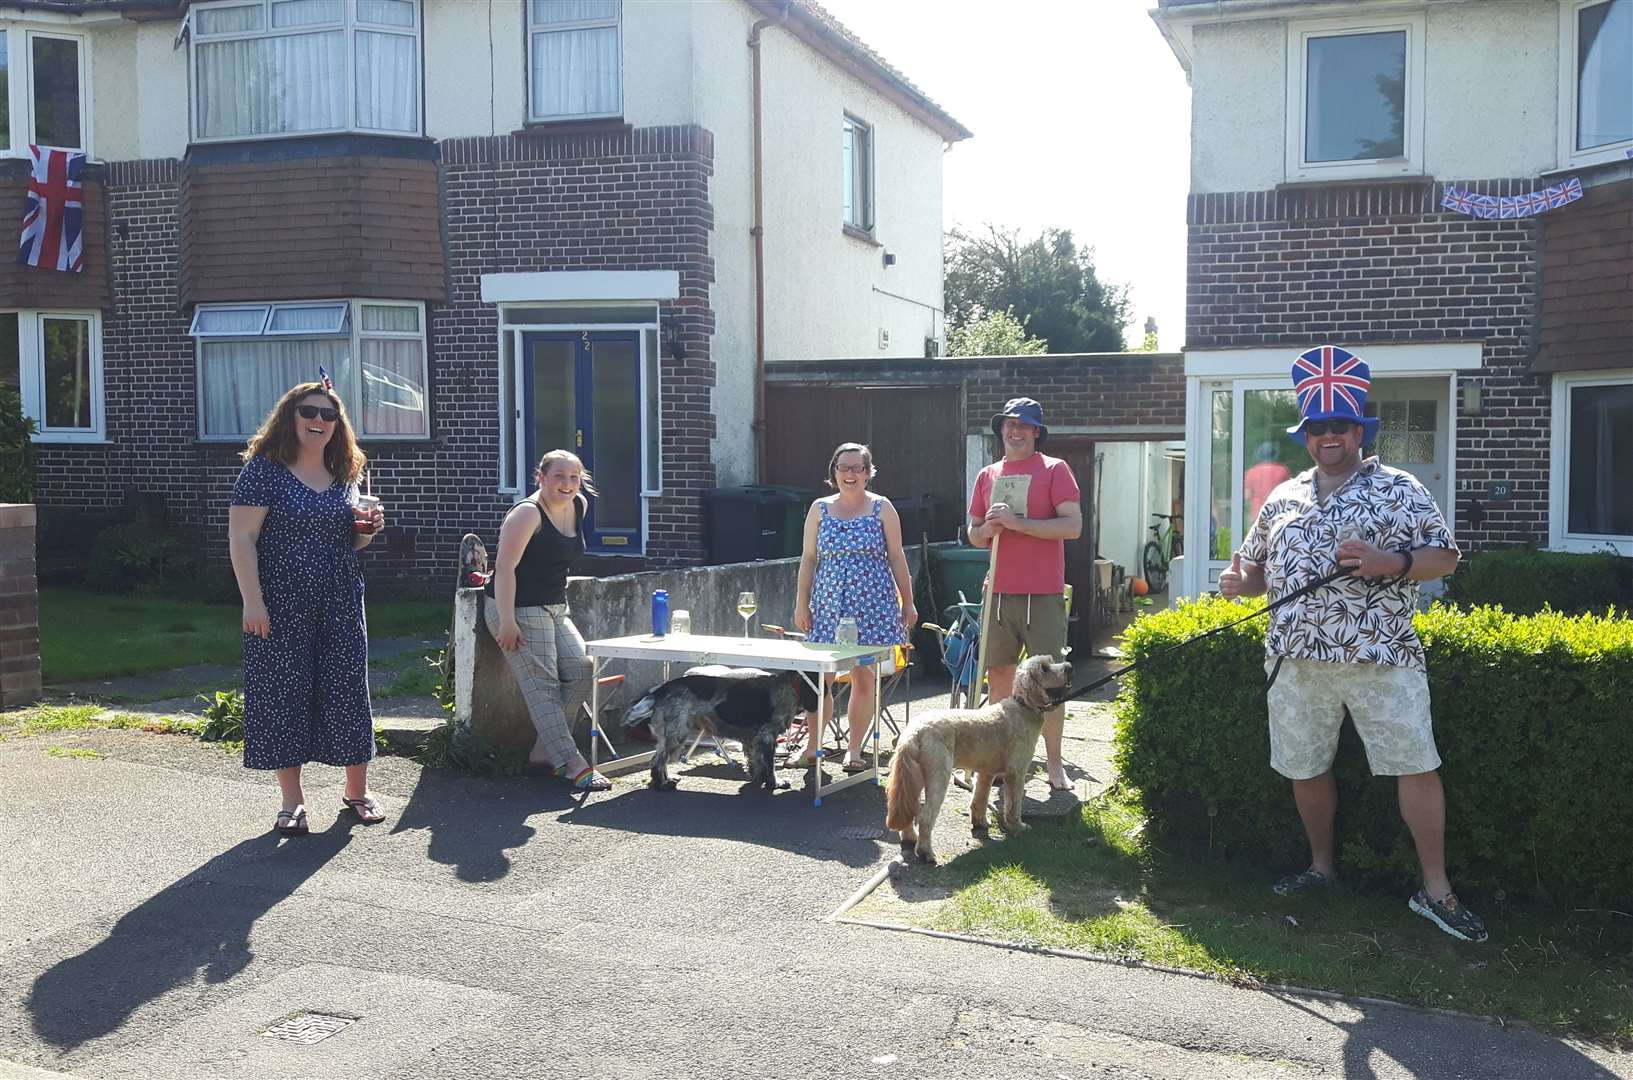 Residents of Greenside, Maidstone, had to make their street party socially-distanced